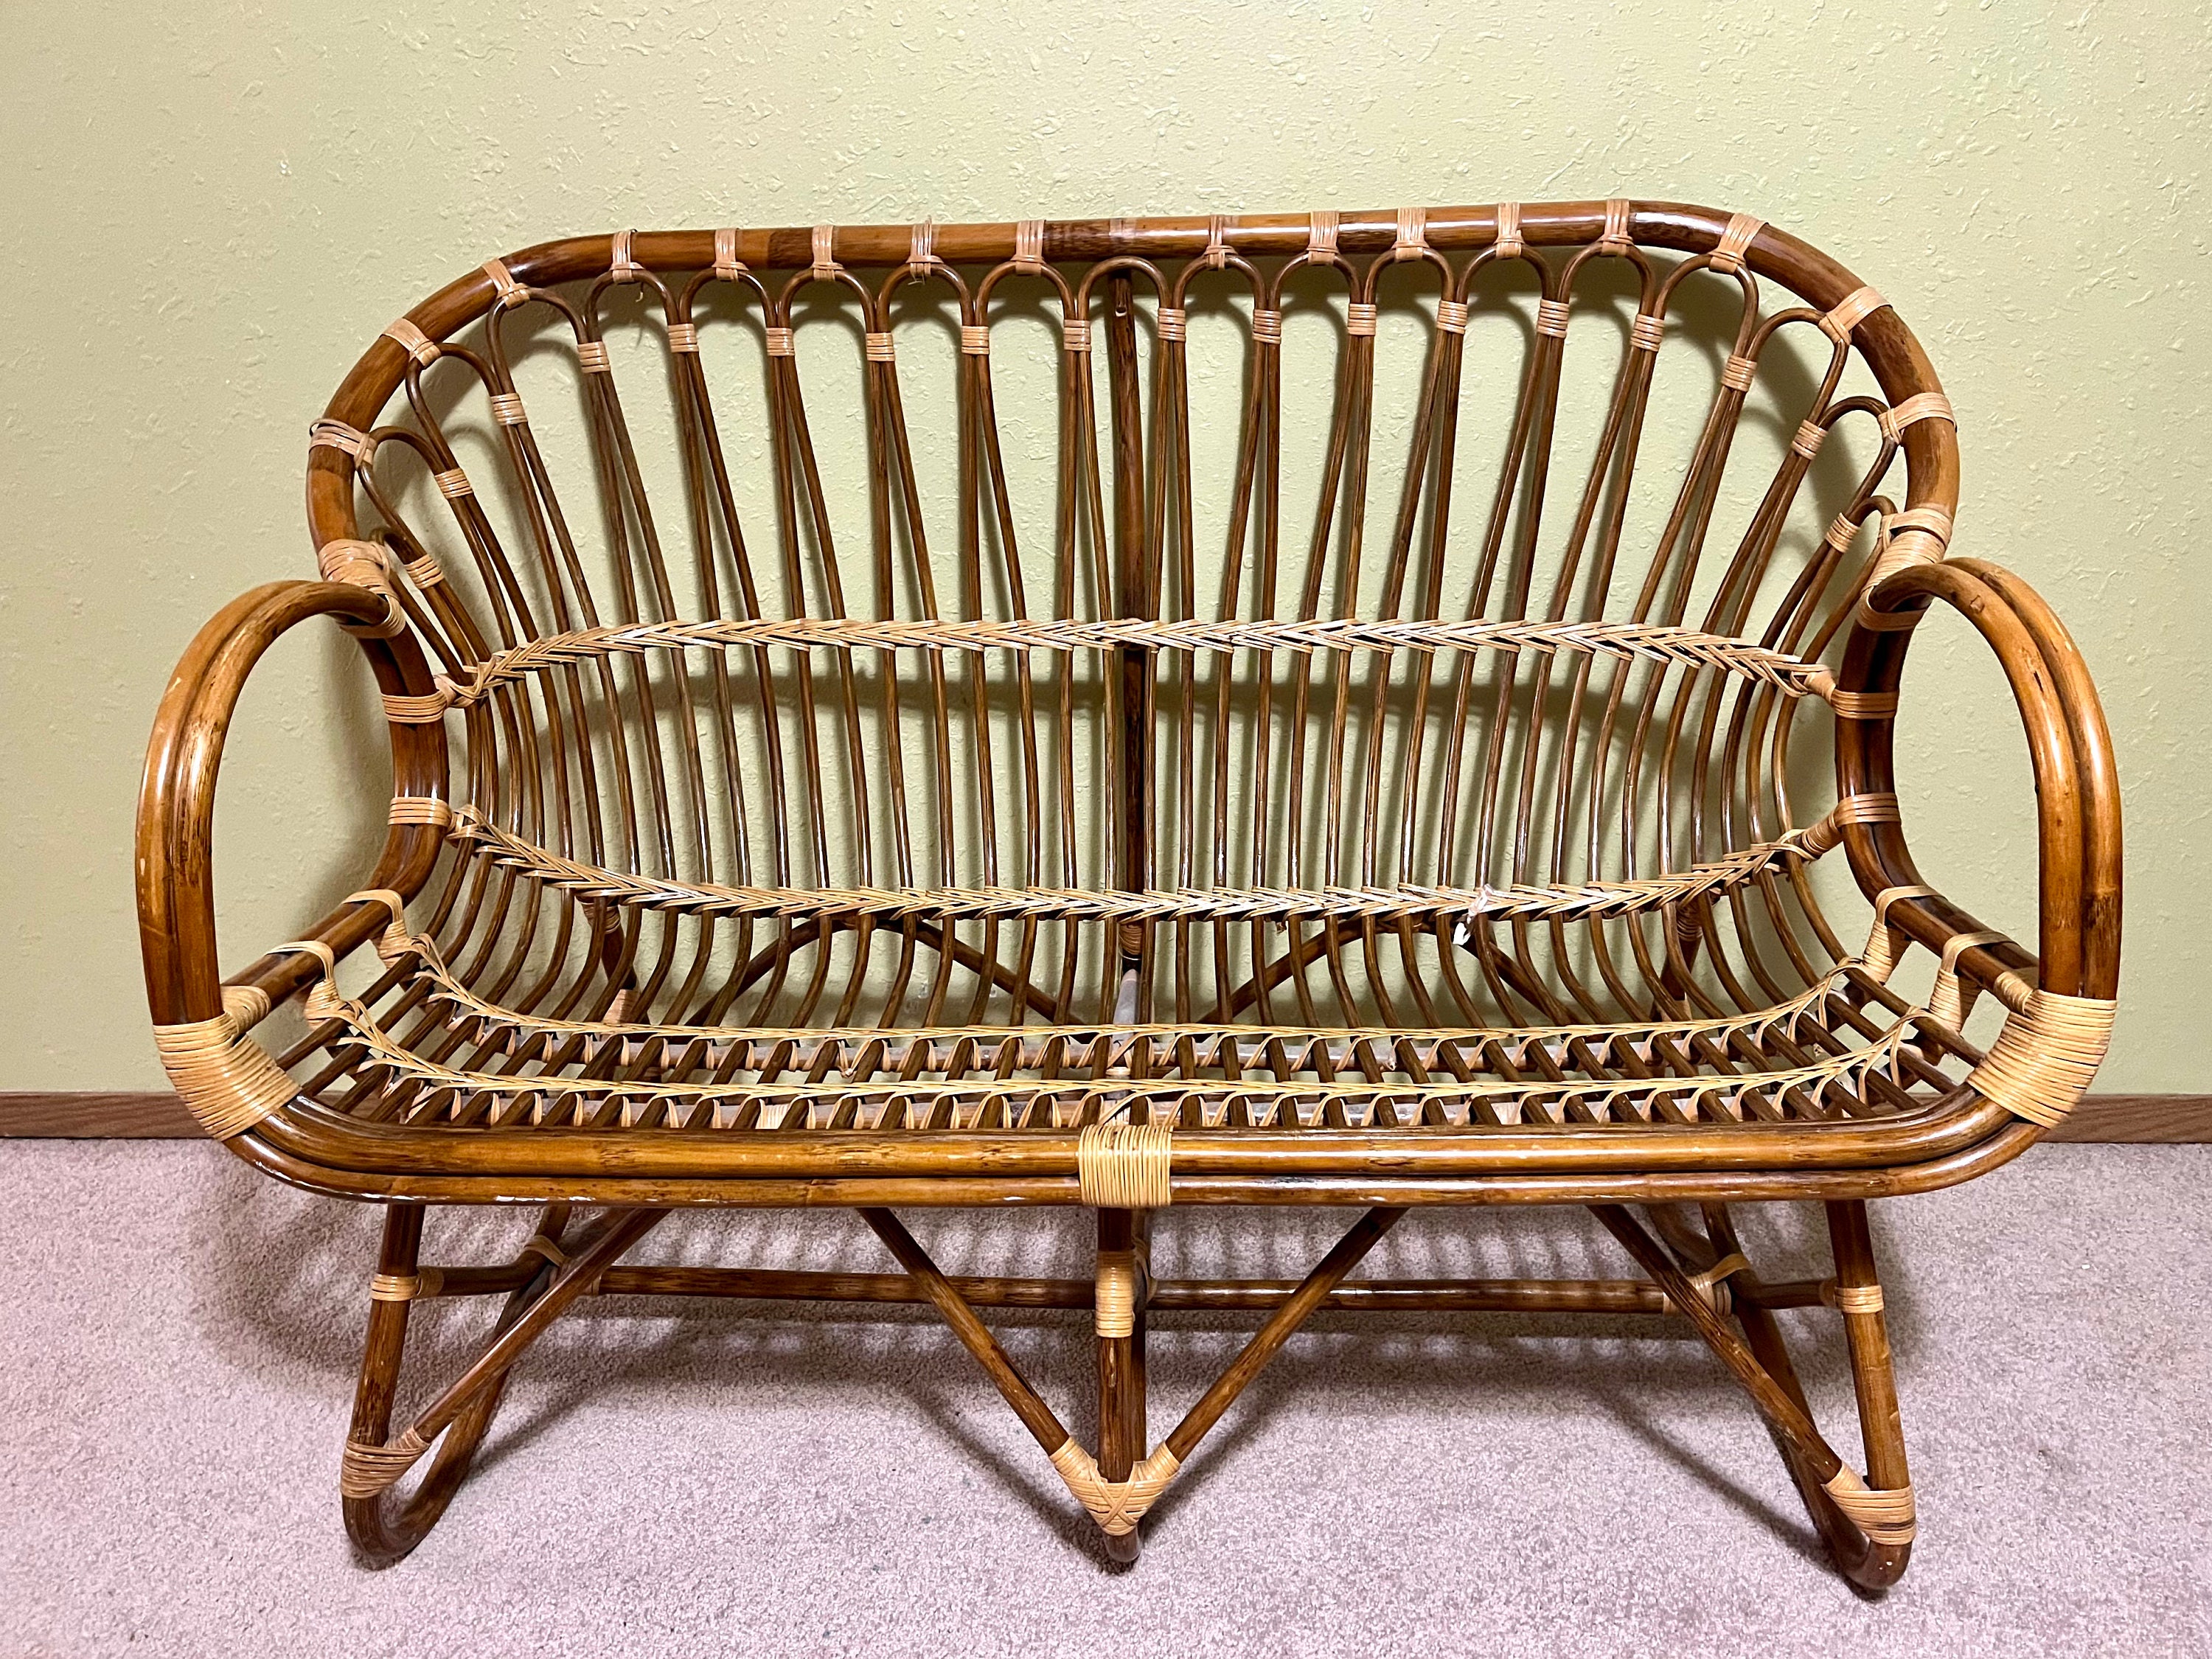 Vintage Rattan Etsy - Couch